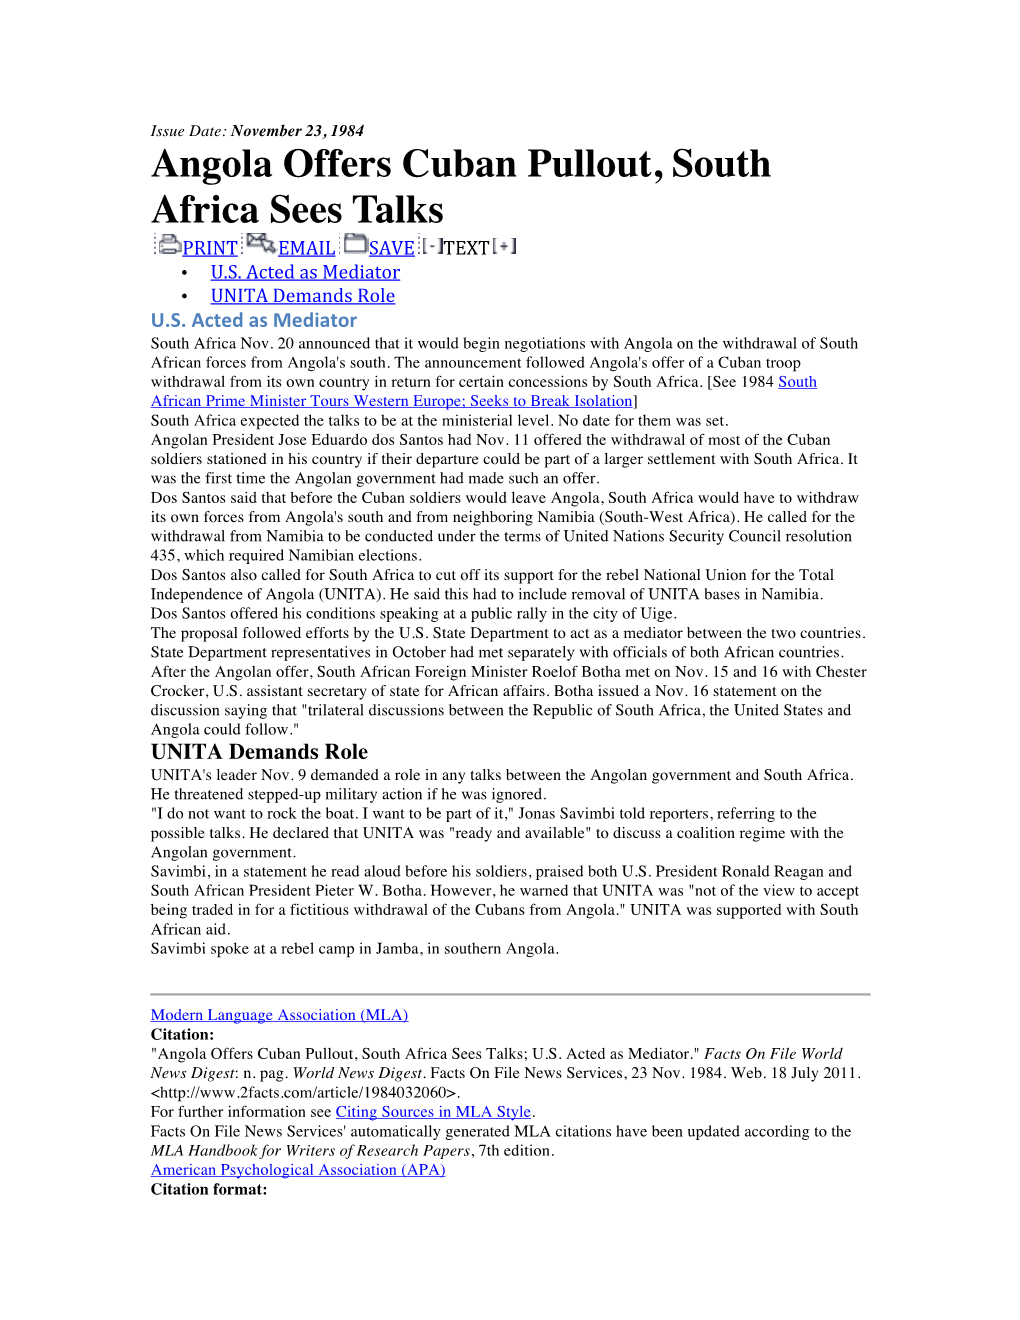 Angola Offers Cuban Pullout, South Africa Sees Talks PRINT EMAIL SAVE TEXT • U.S